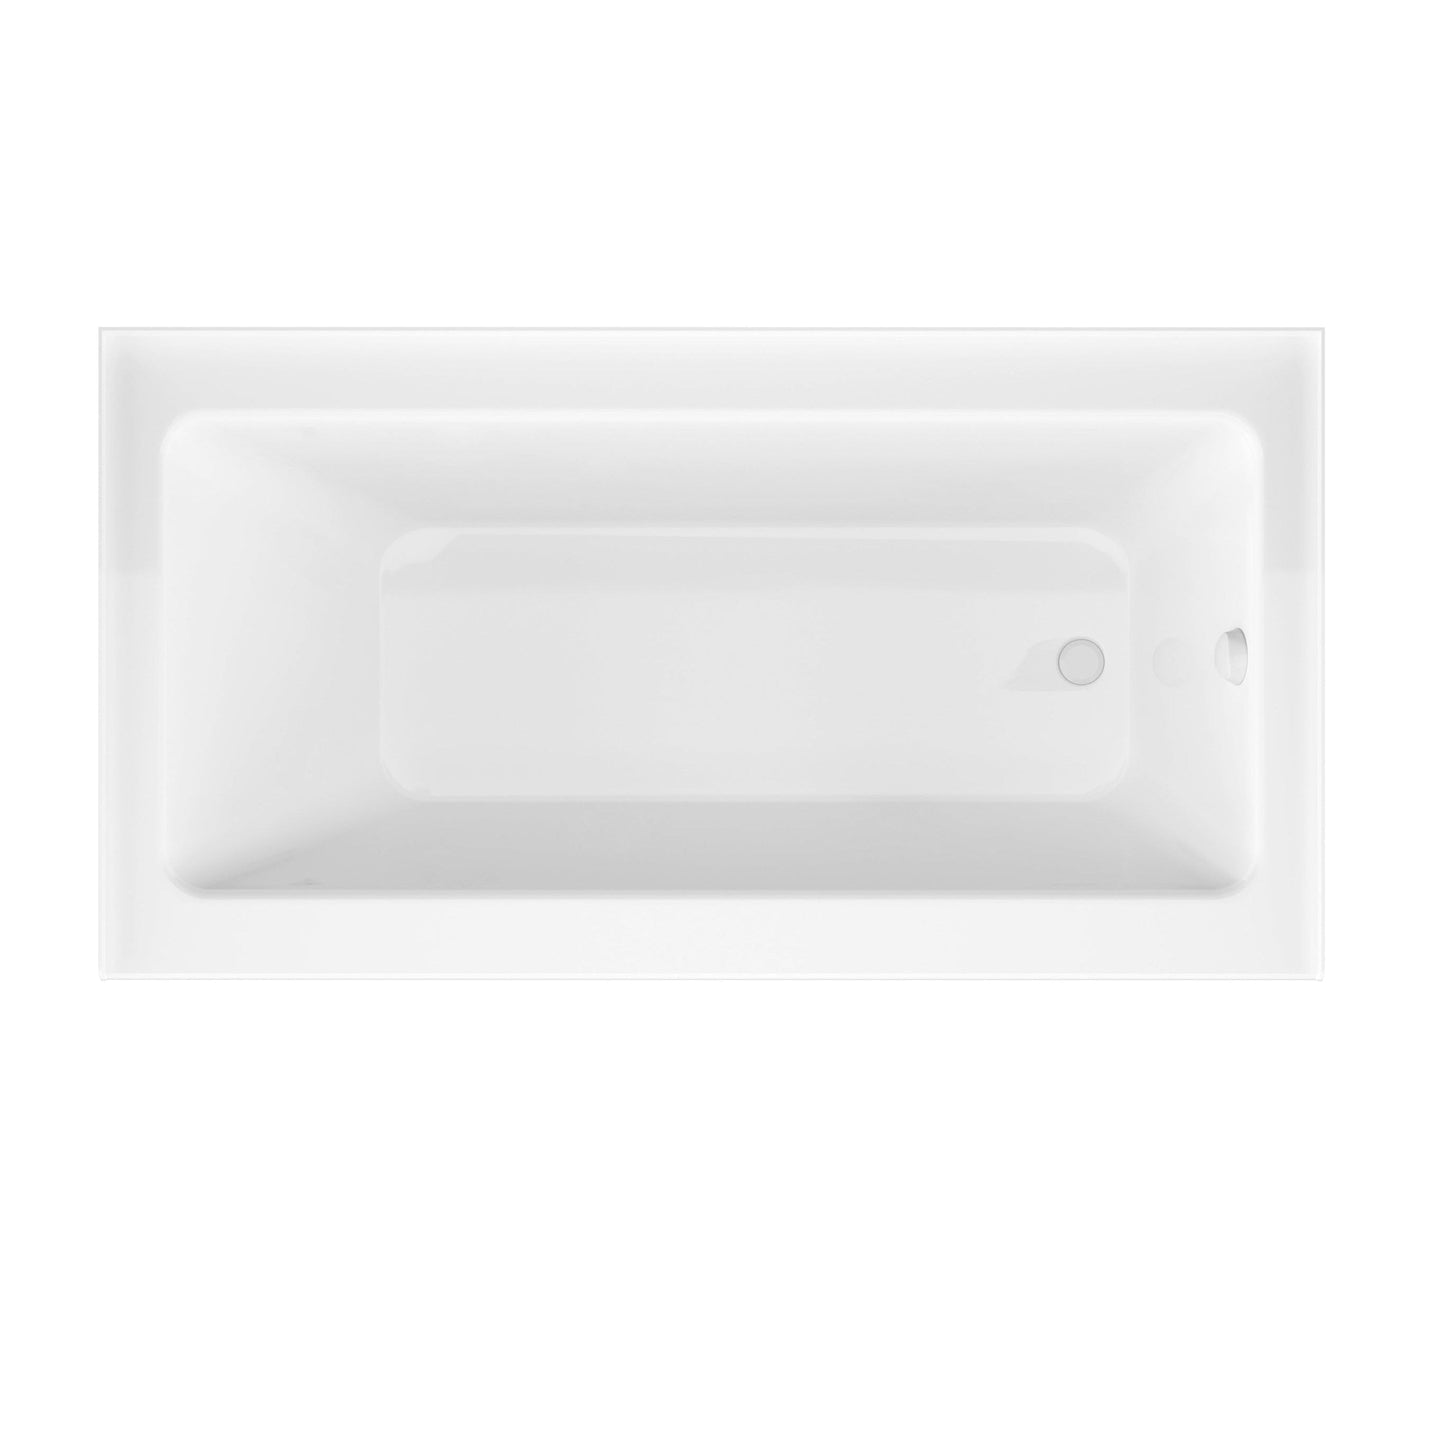 ANZZI Herald Series White "60 x 30" Alcove Right Drain Rectangular Bathtub With Built-In Flange and Frameless Brushed Nickel Hinged Door